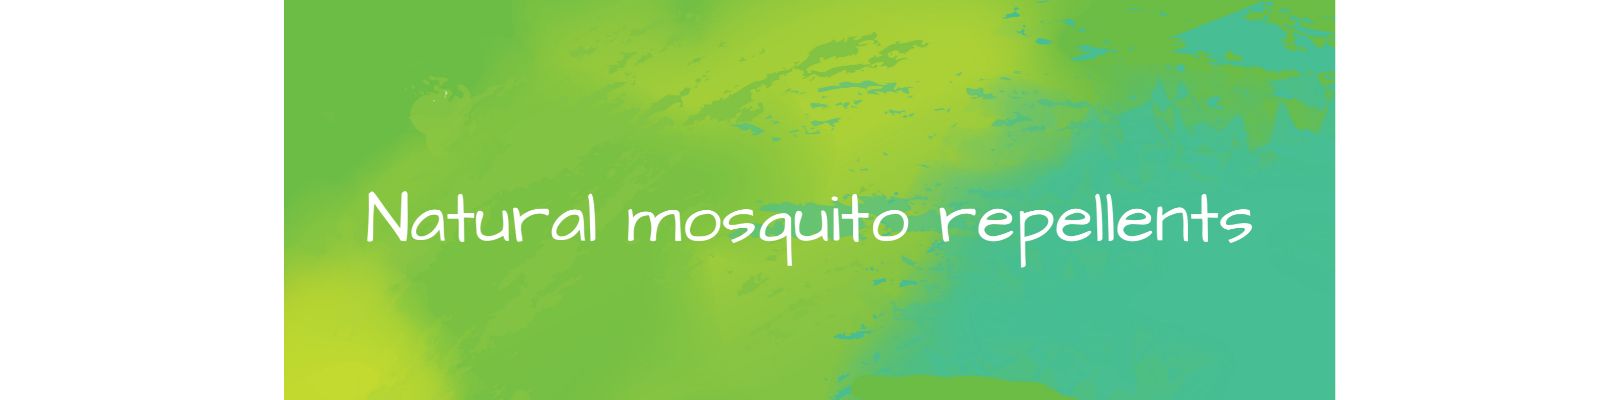 Natural mosquito repellents on ecomauritius.mu